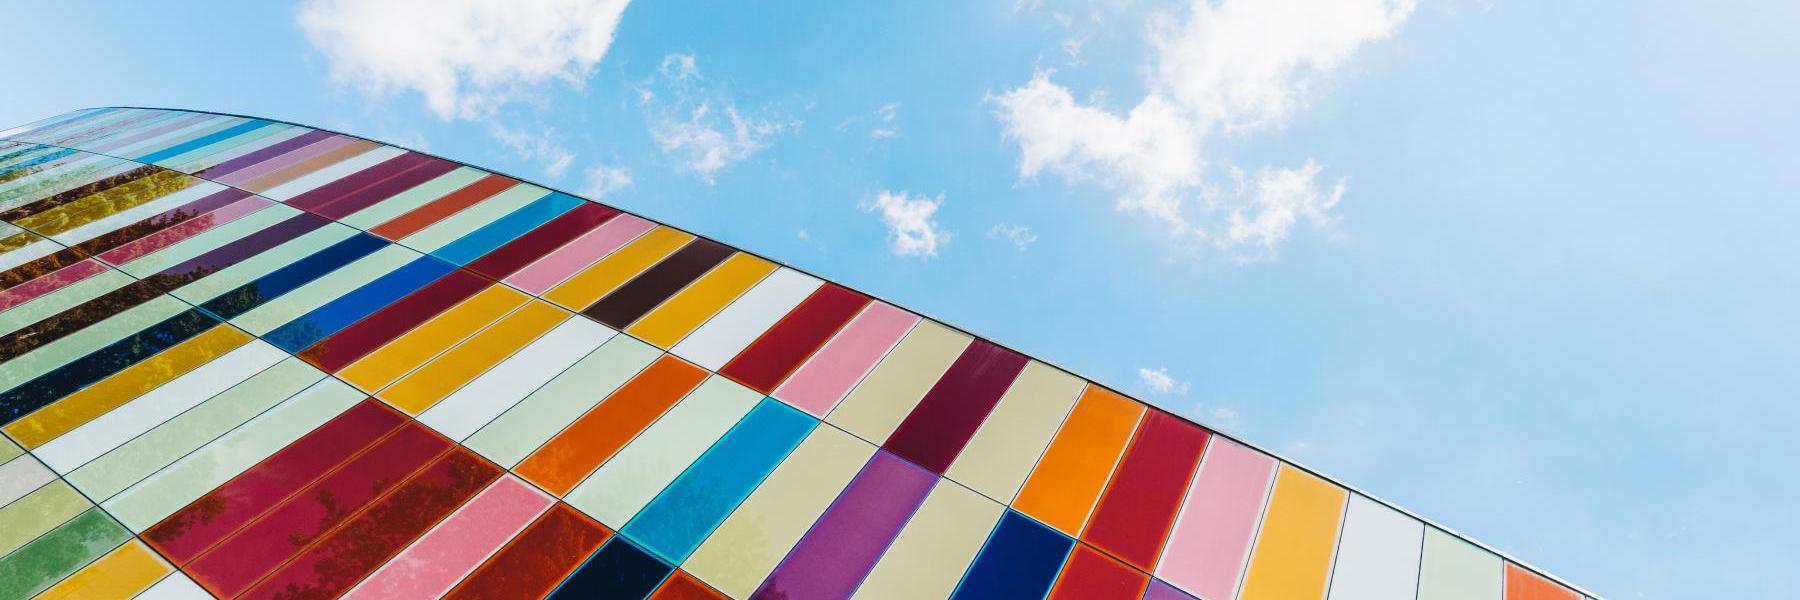 colourful tiles and sky